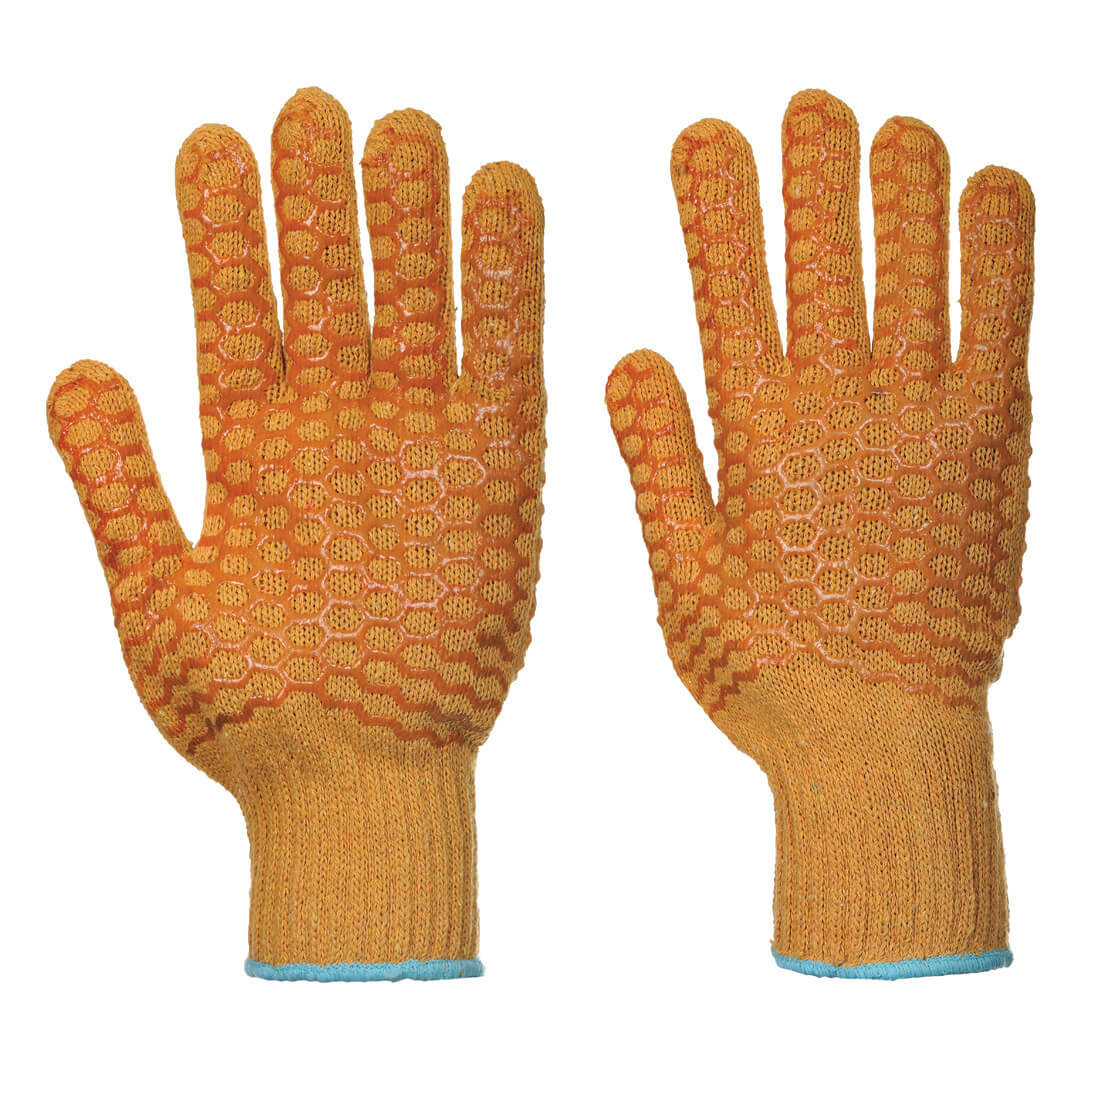 Criss Cross Glove - Personal protection